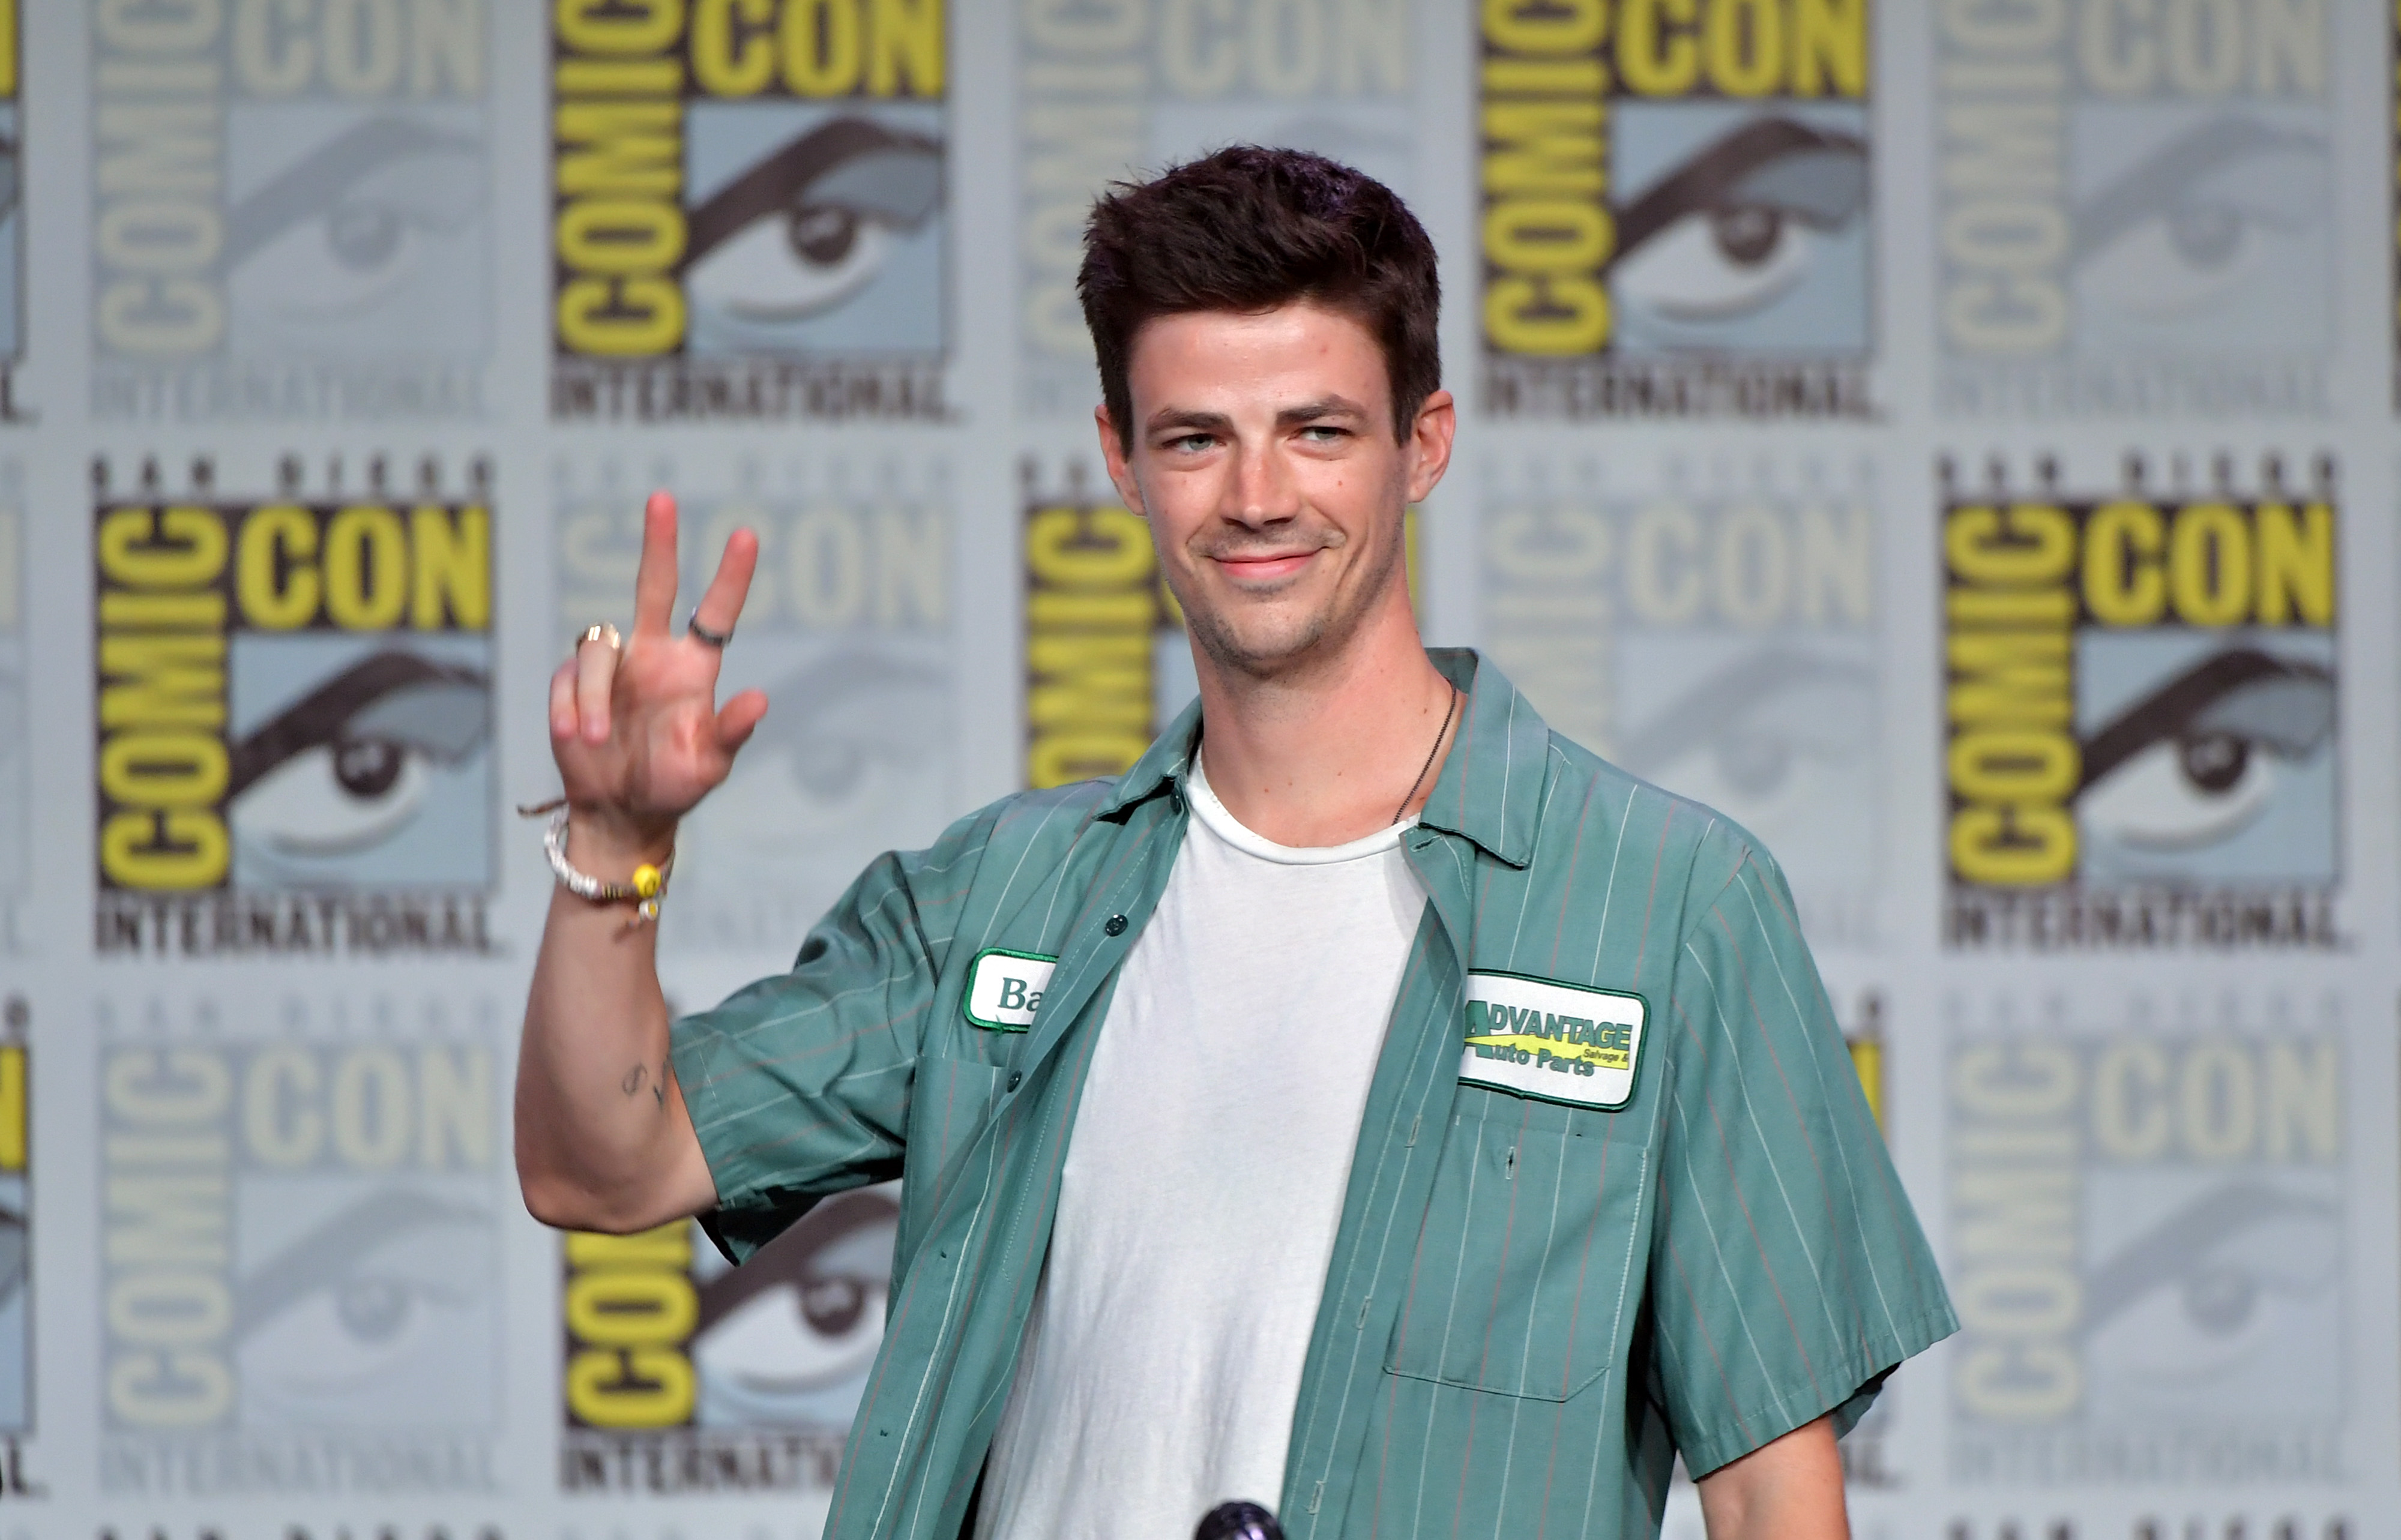 Grant Gustin, from the Arrowverse, arrives on stage at San Diego Comic Con in 2019.